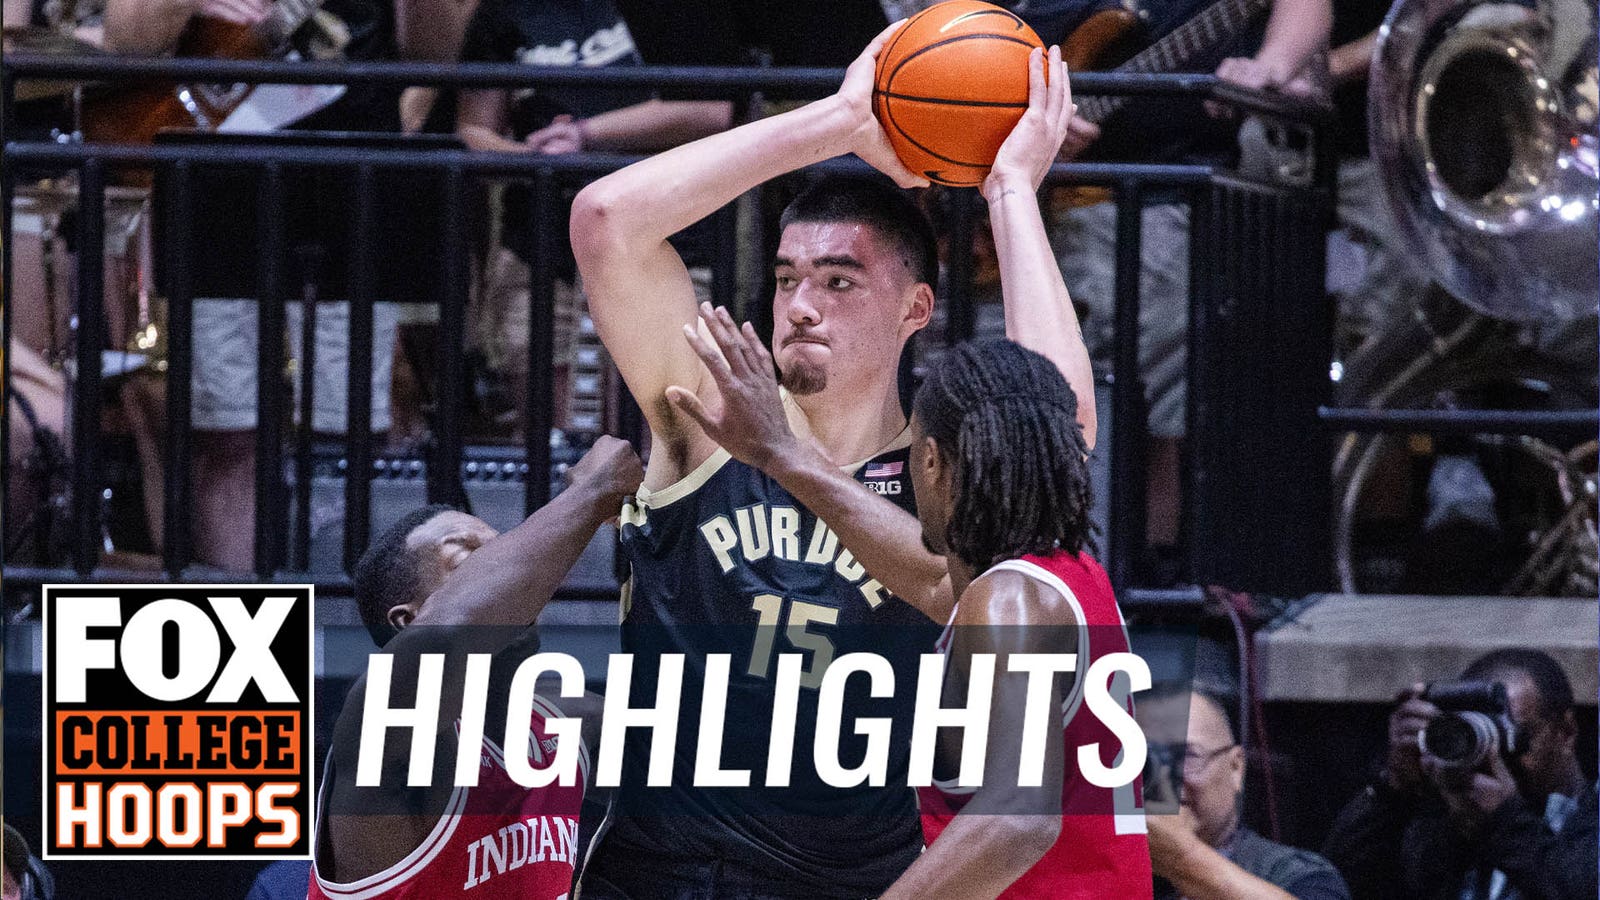 Zach Edey goes off for 26 points in Purdue's dominant victory over Indiana